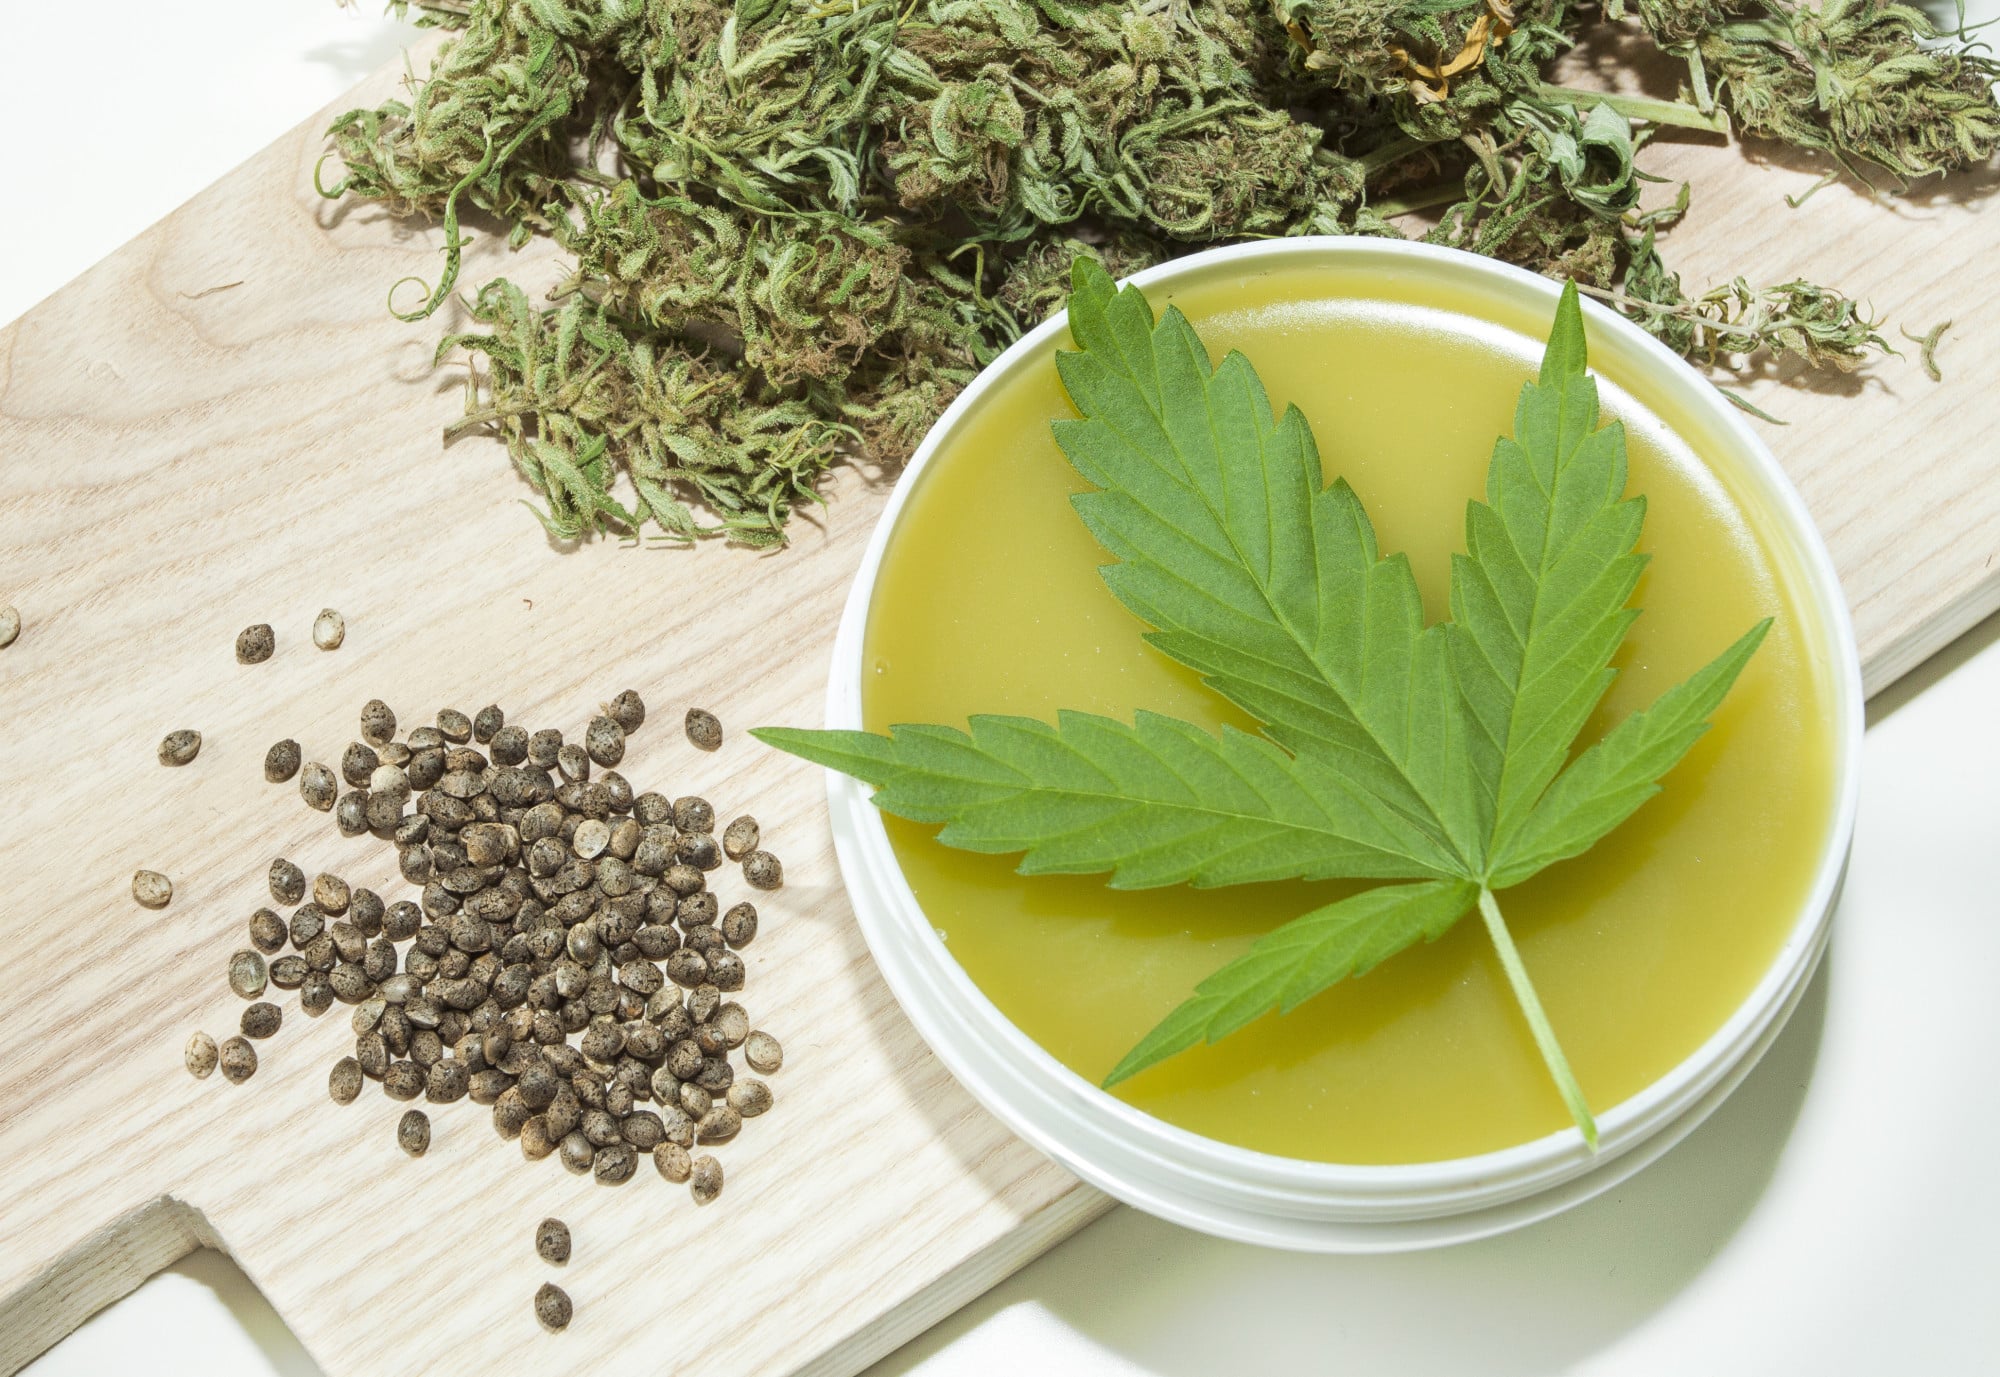 How to Make Cbd Oil: A Complete Guide